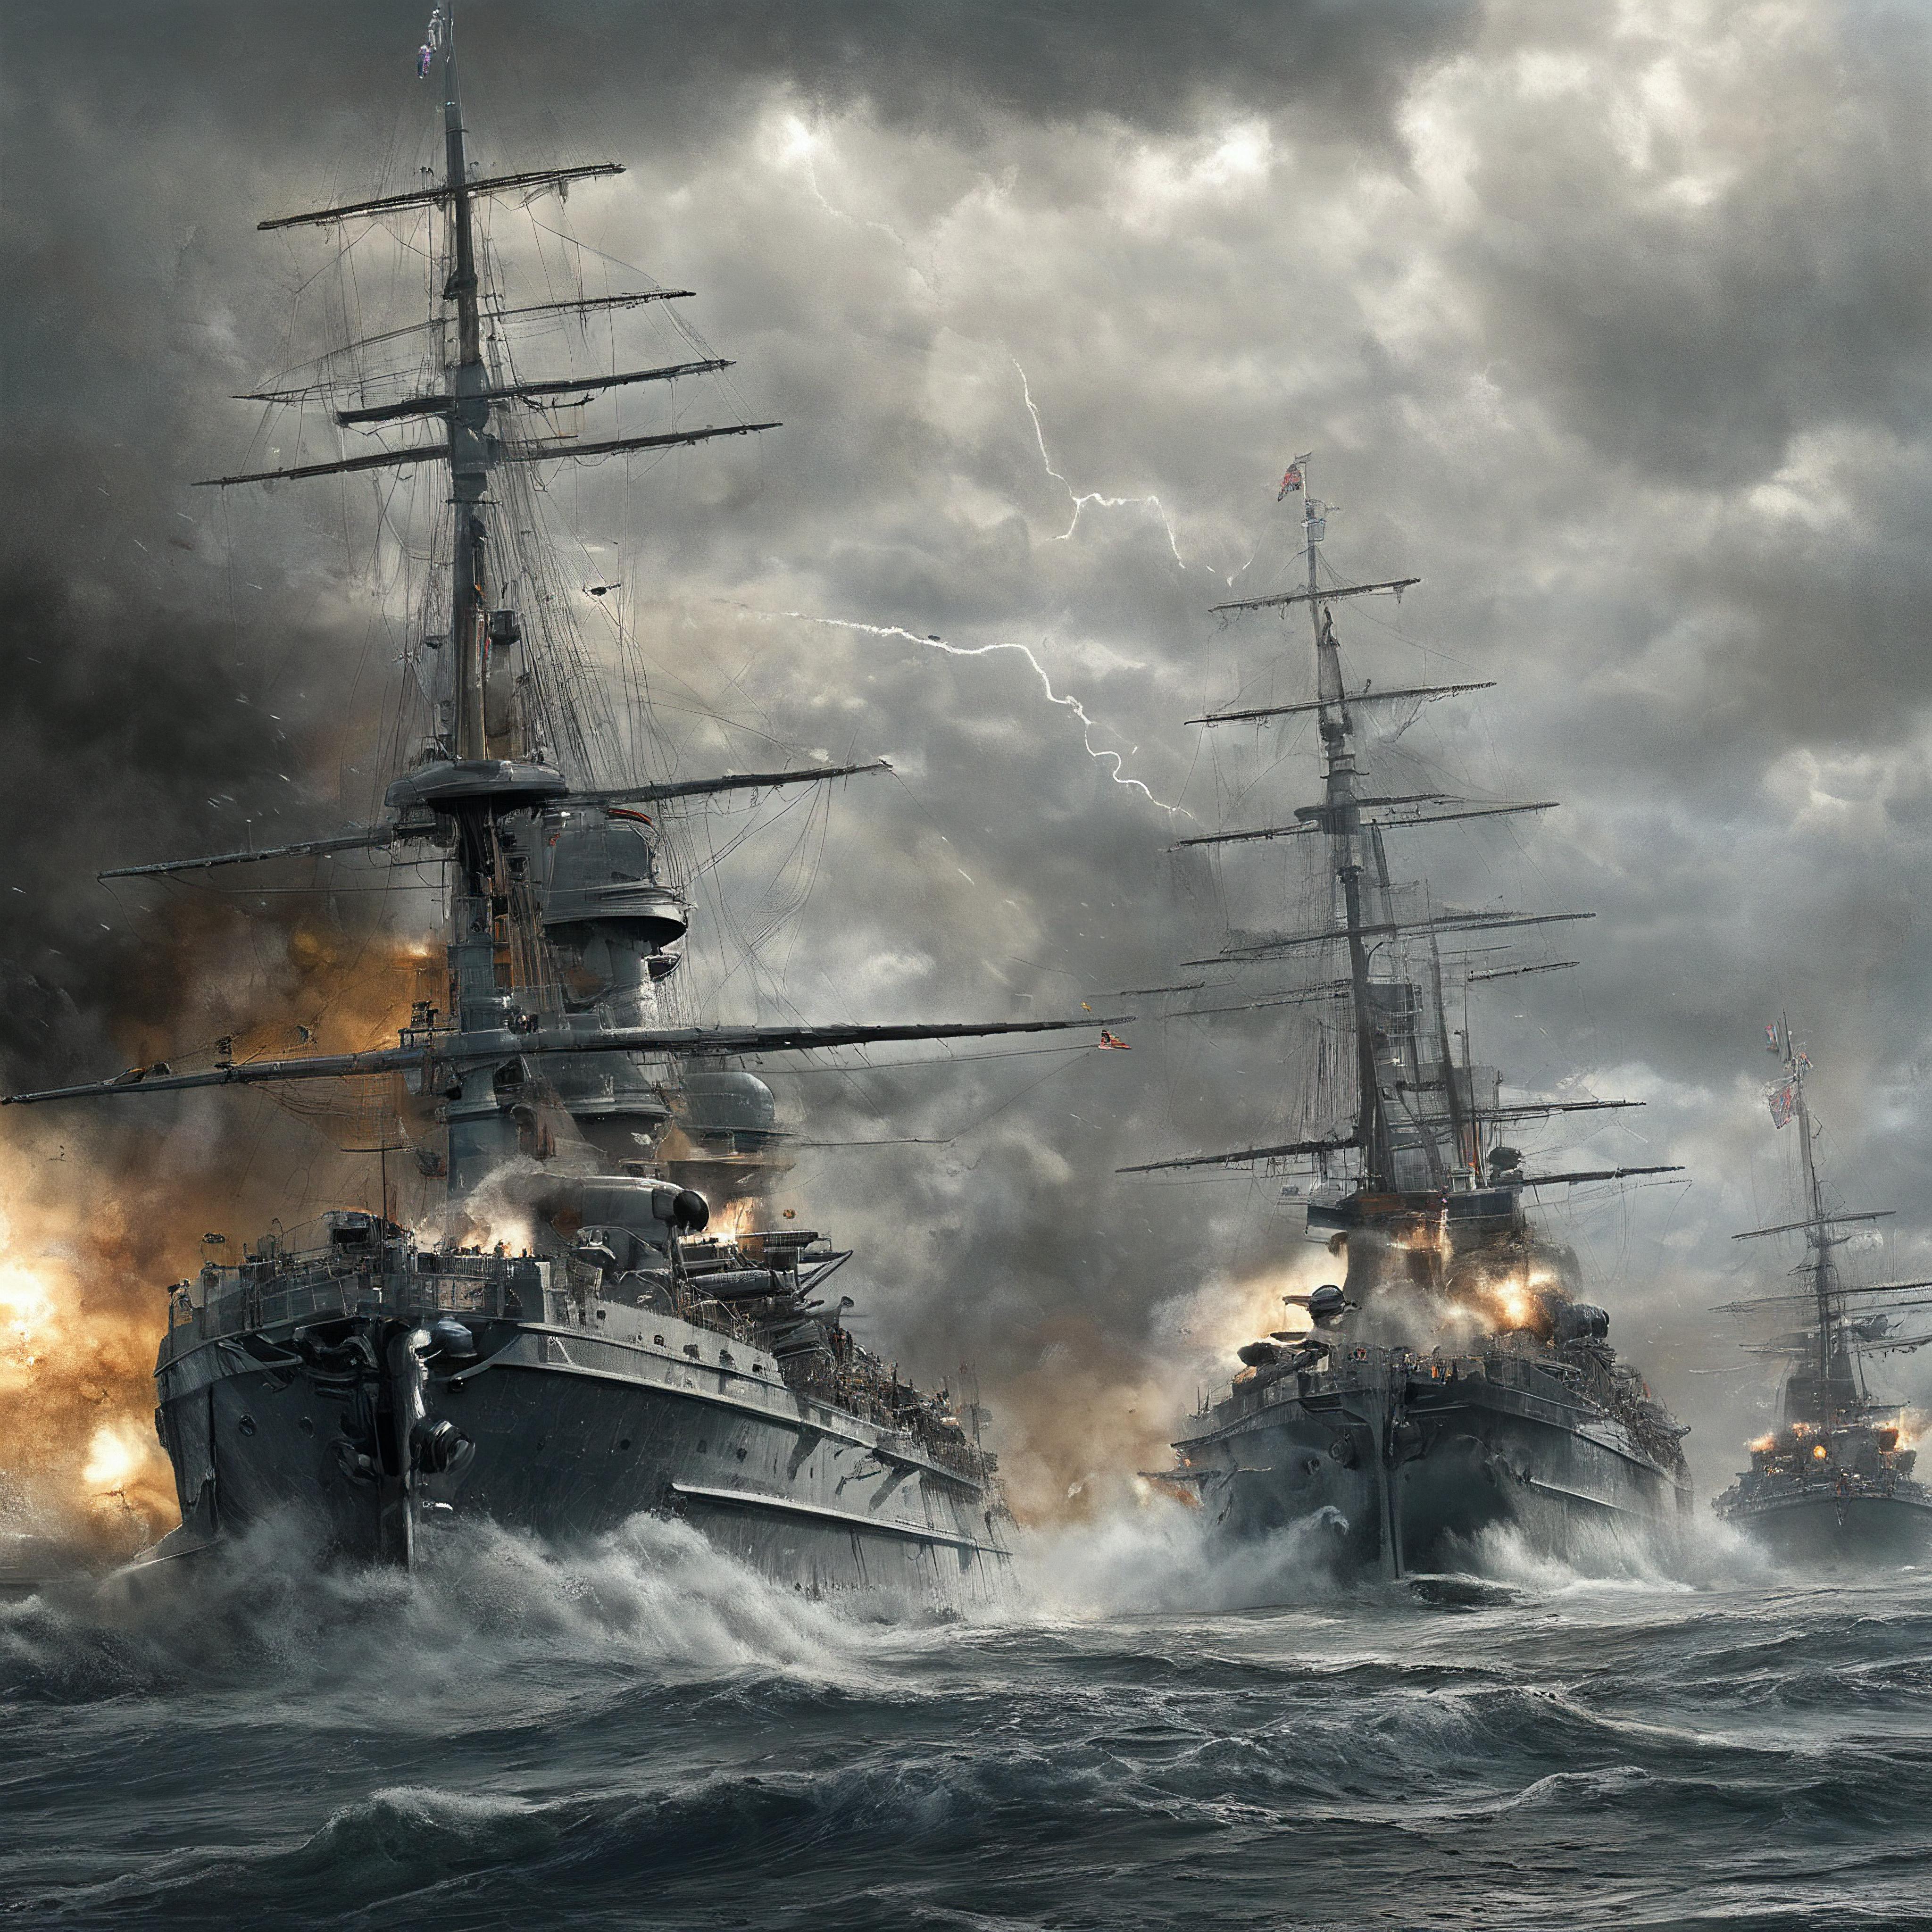 A dramatic naval battle scene featuring four large battleships with smoke, fire, and lightning effects in the background.